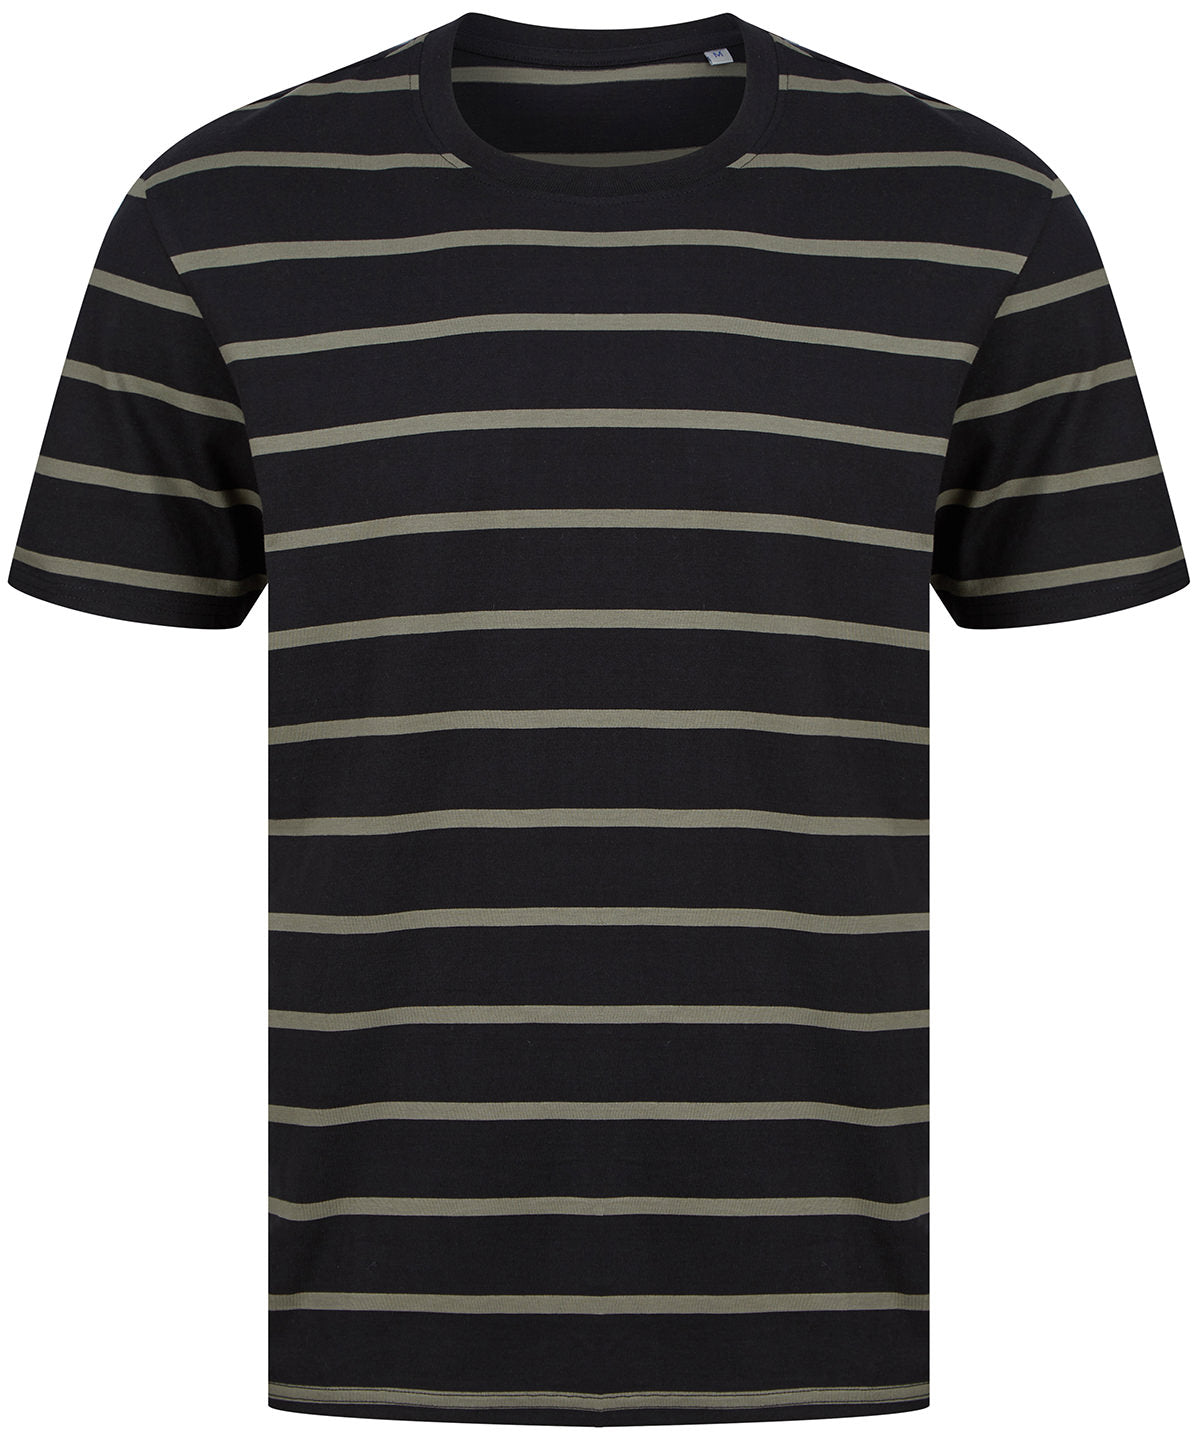 Personalised T-Shirts - Stripes Front Row Striped T